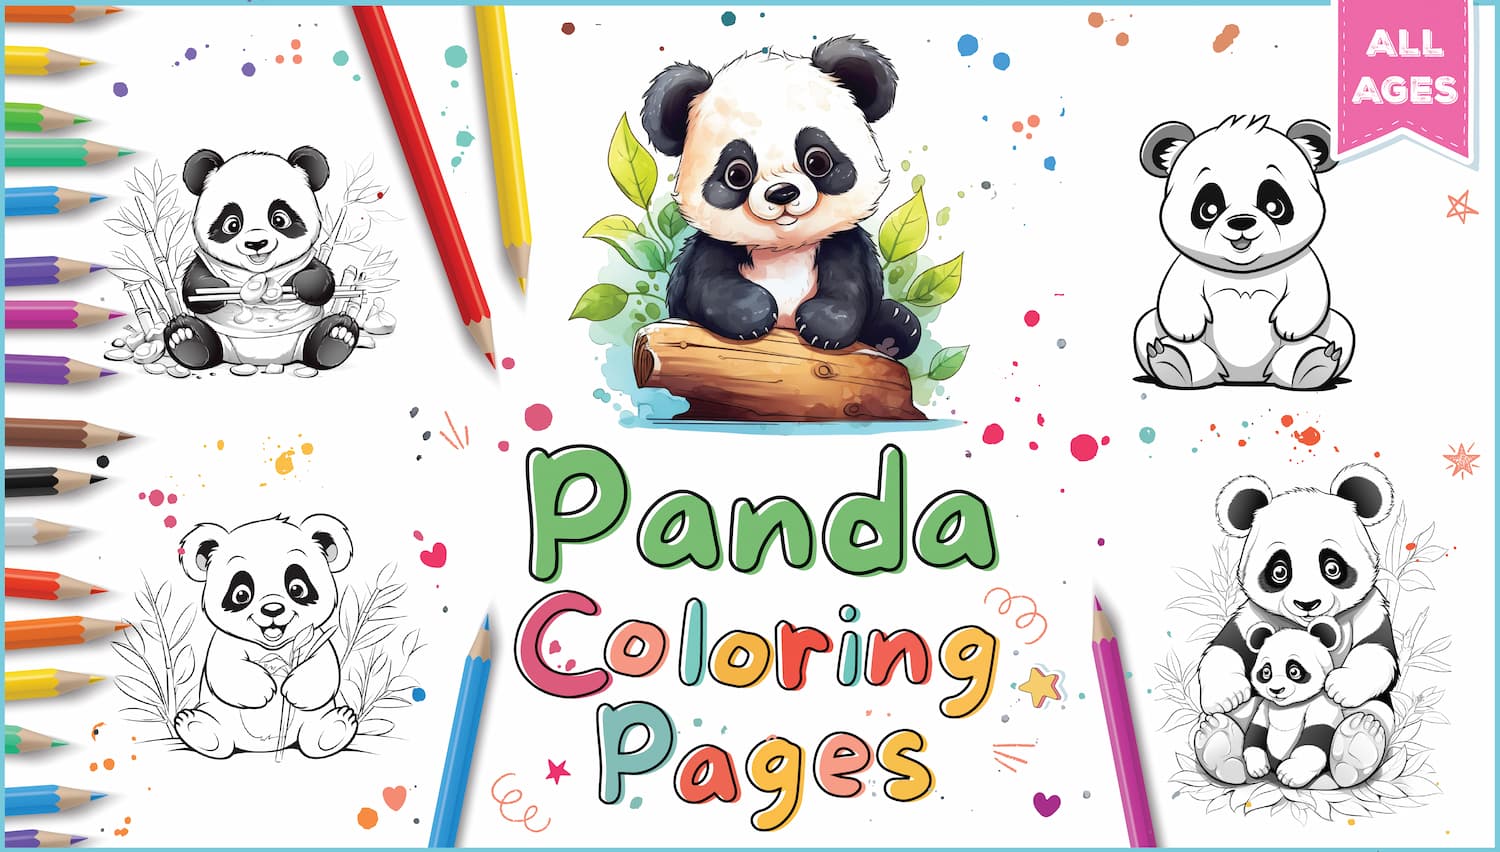 Panda coloring pages for kids adults